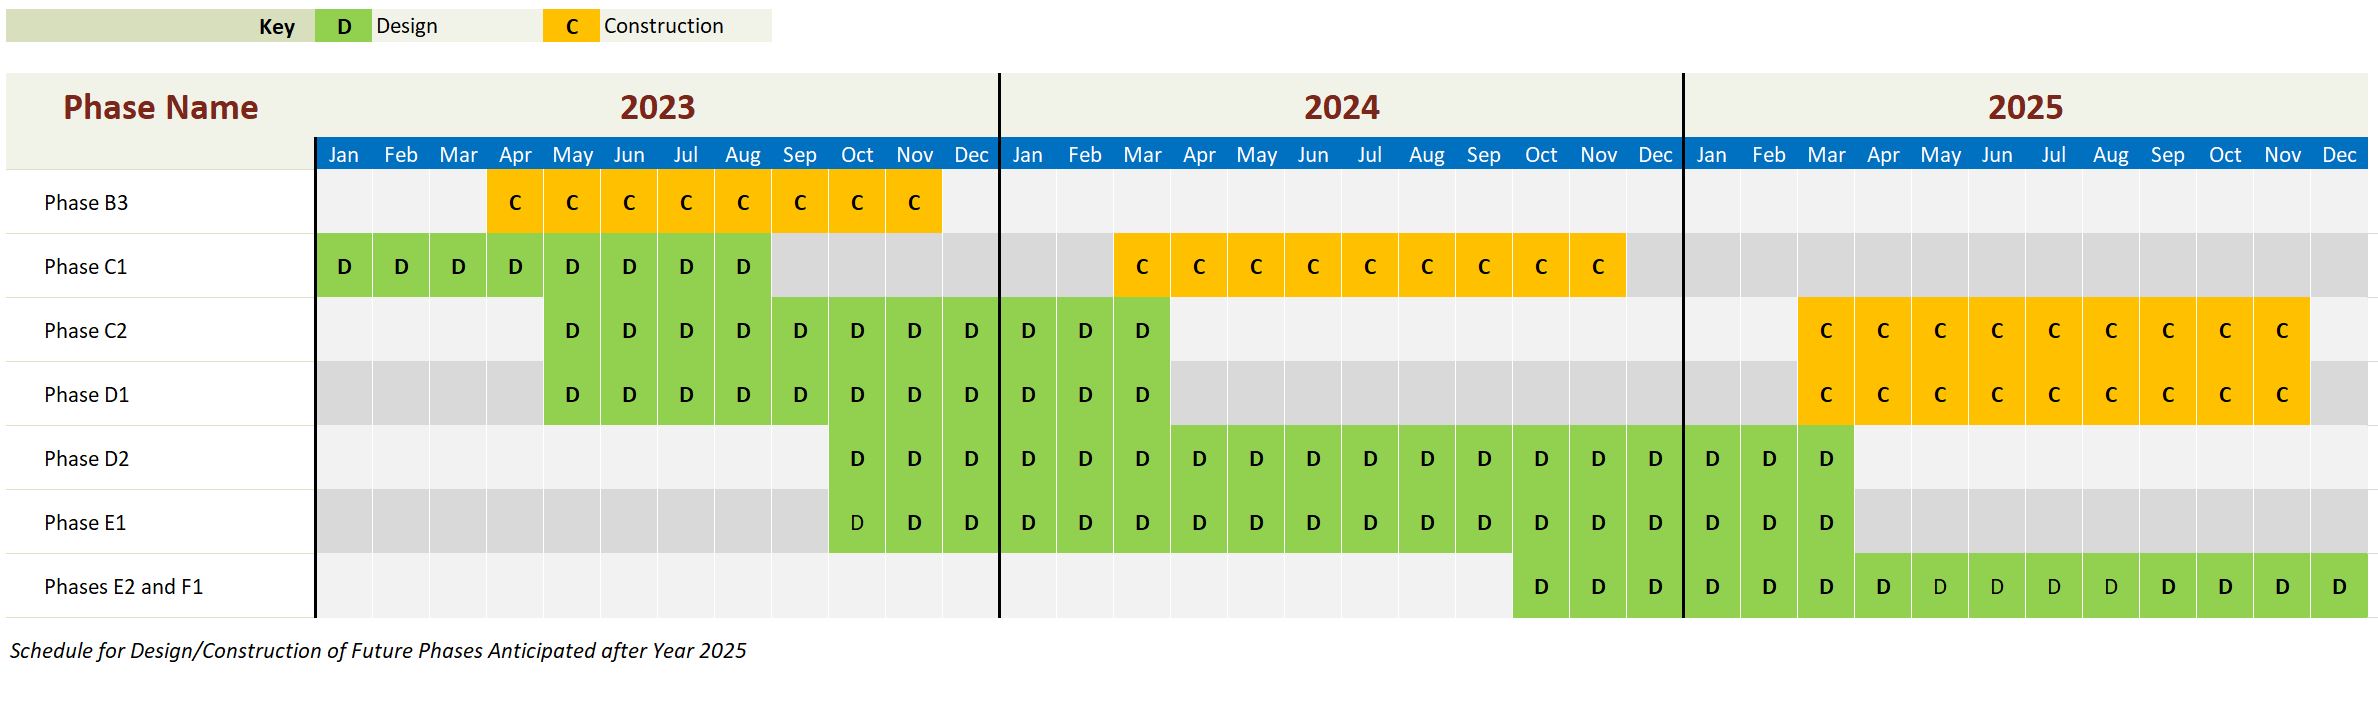 Signal Projects Schedule 2024.JPG